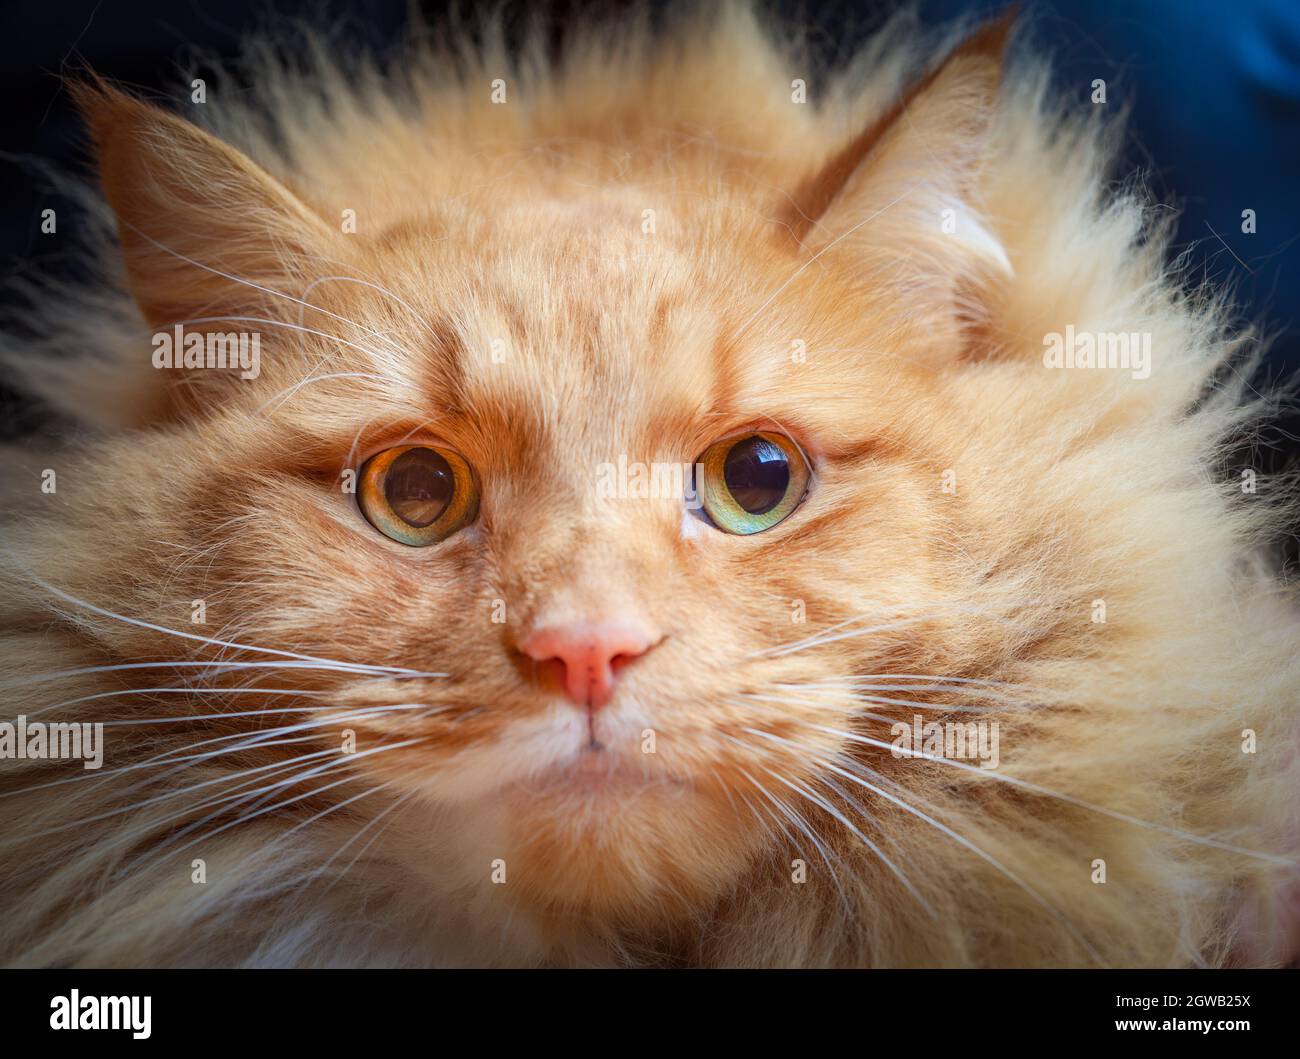 Serioius Ginger Cat With Wide Open Eyes Portrait Stock Photo